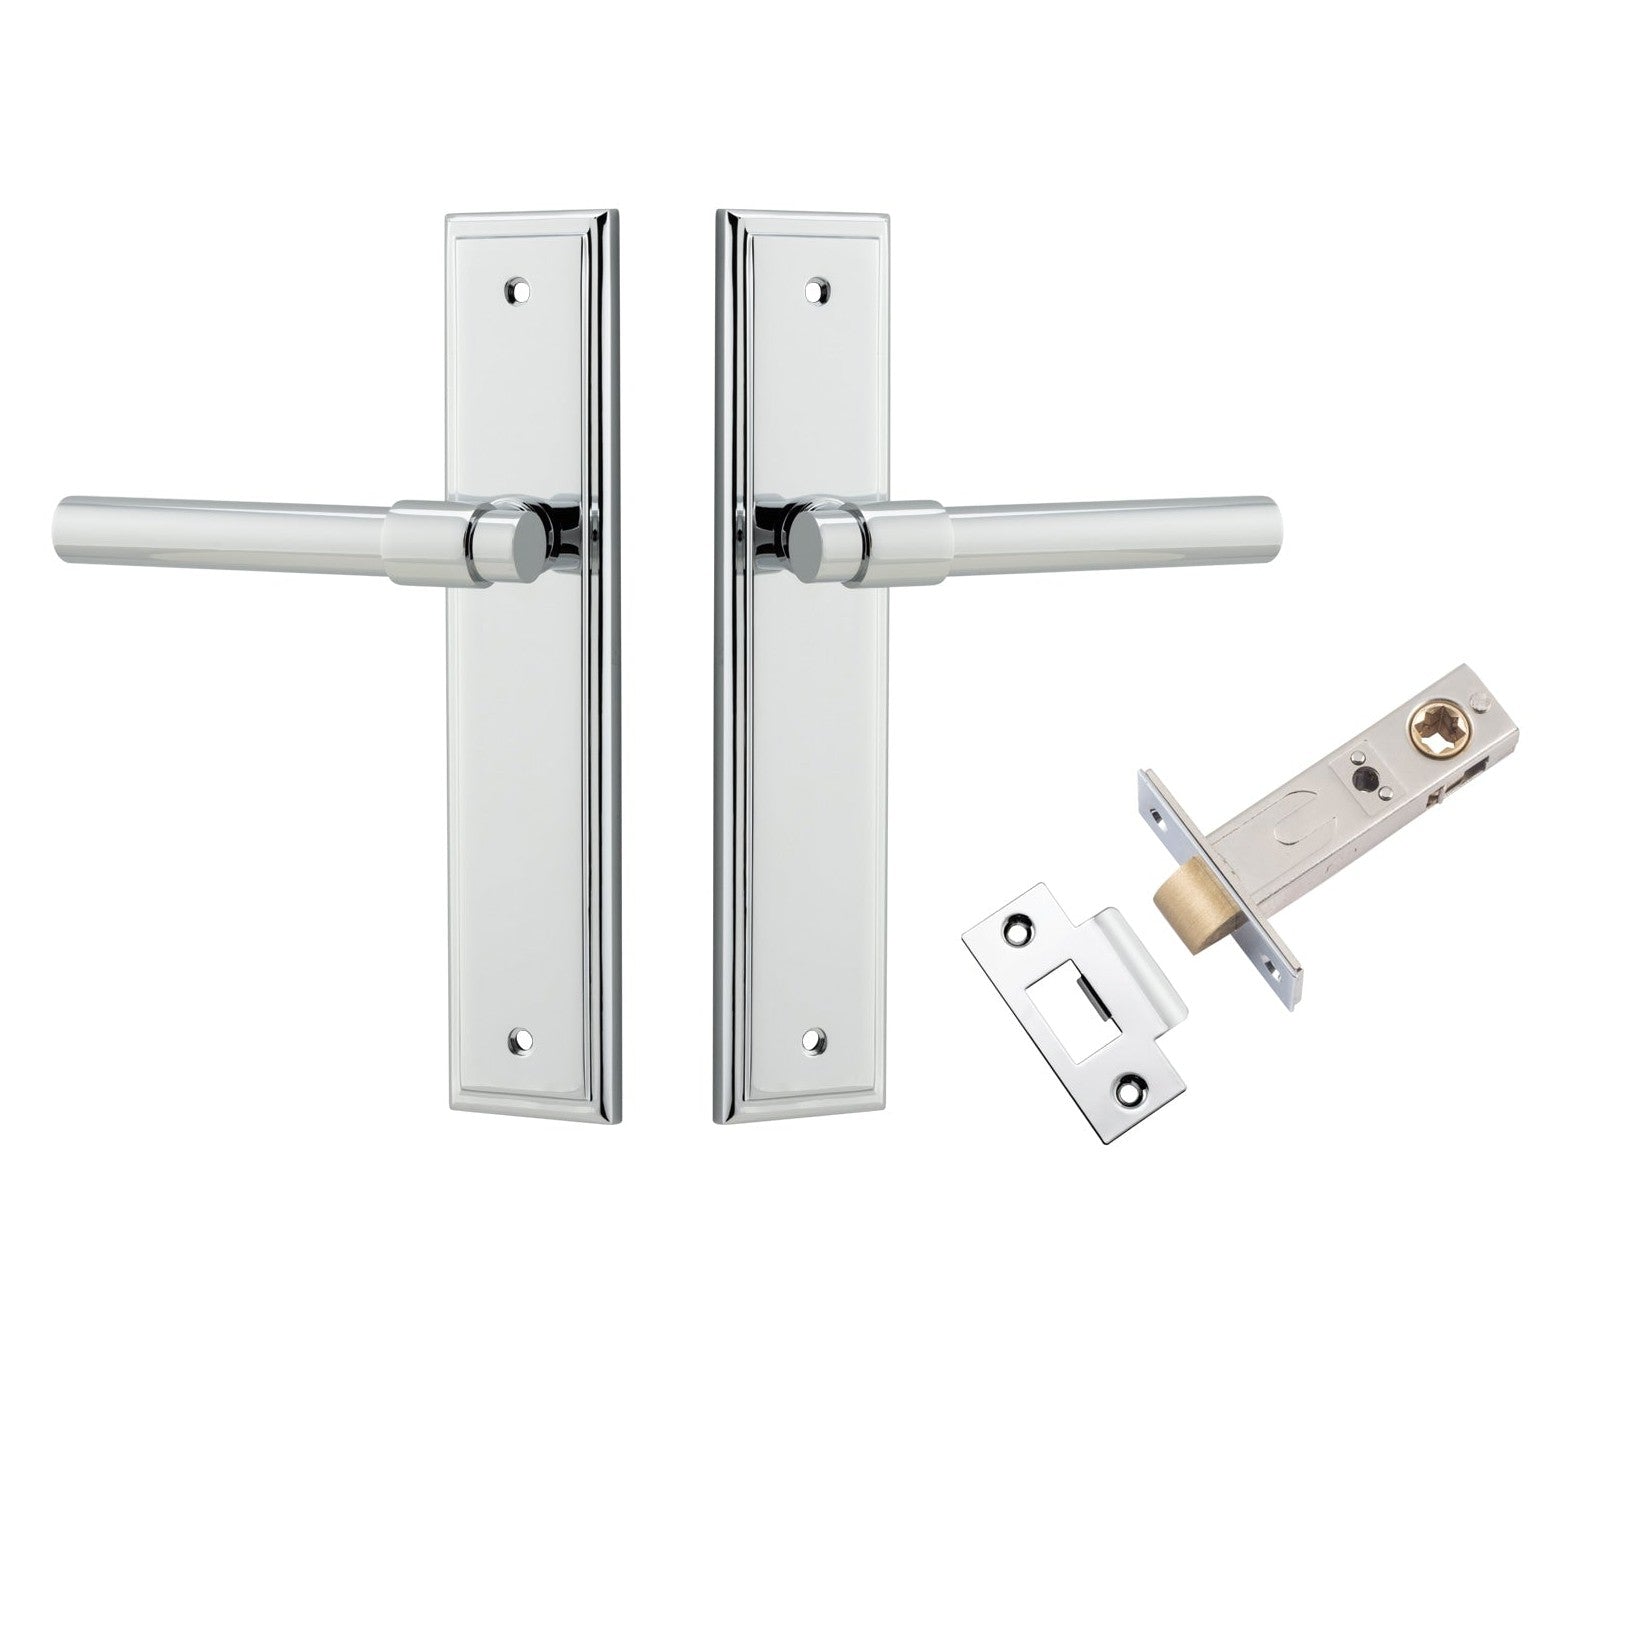 Iver Door Handle Helsinki Stepped Latch Pair Polished Chrome Passage Kit